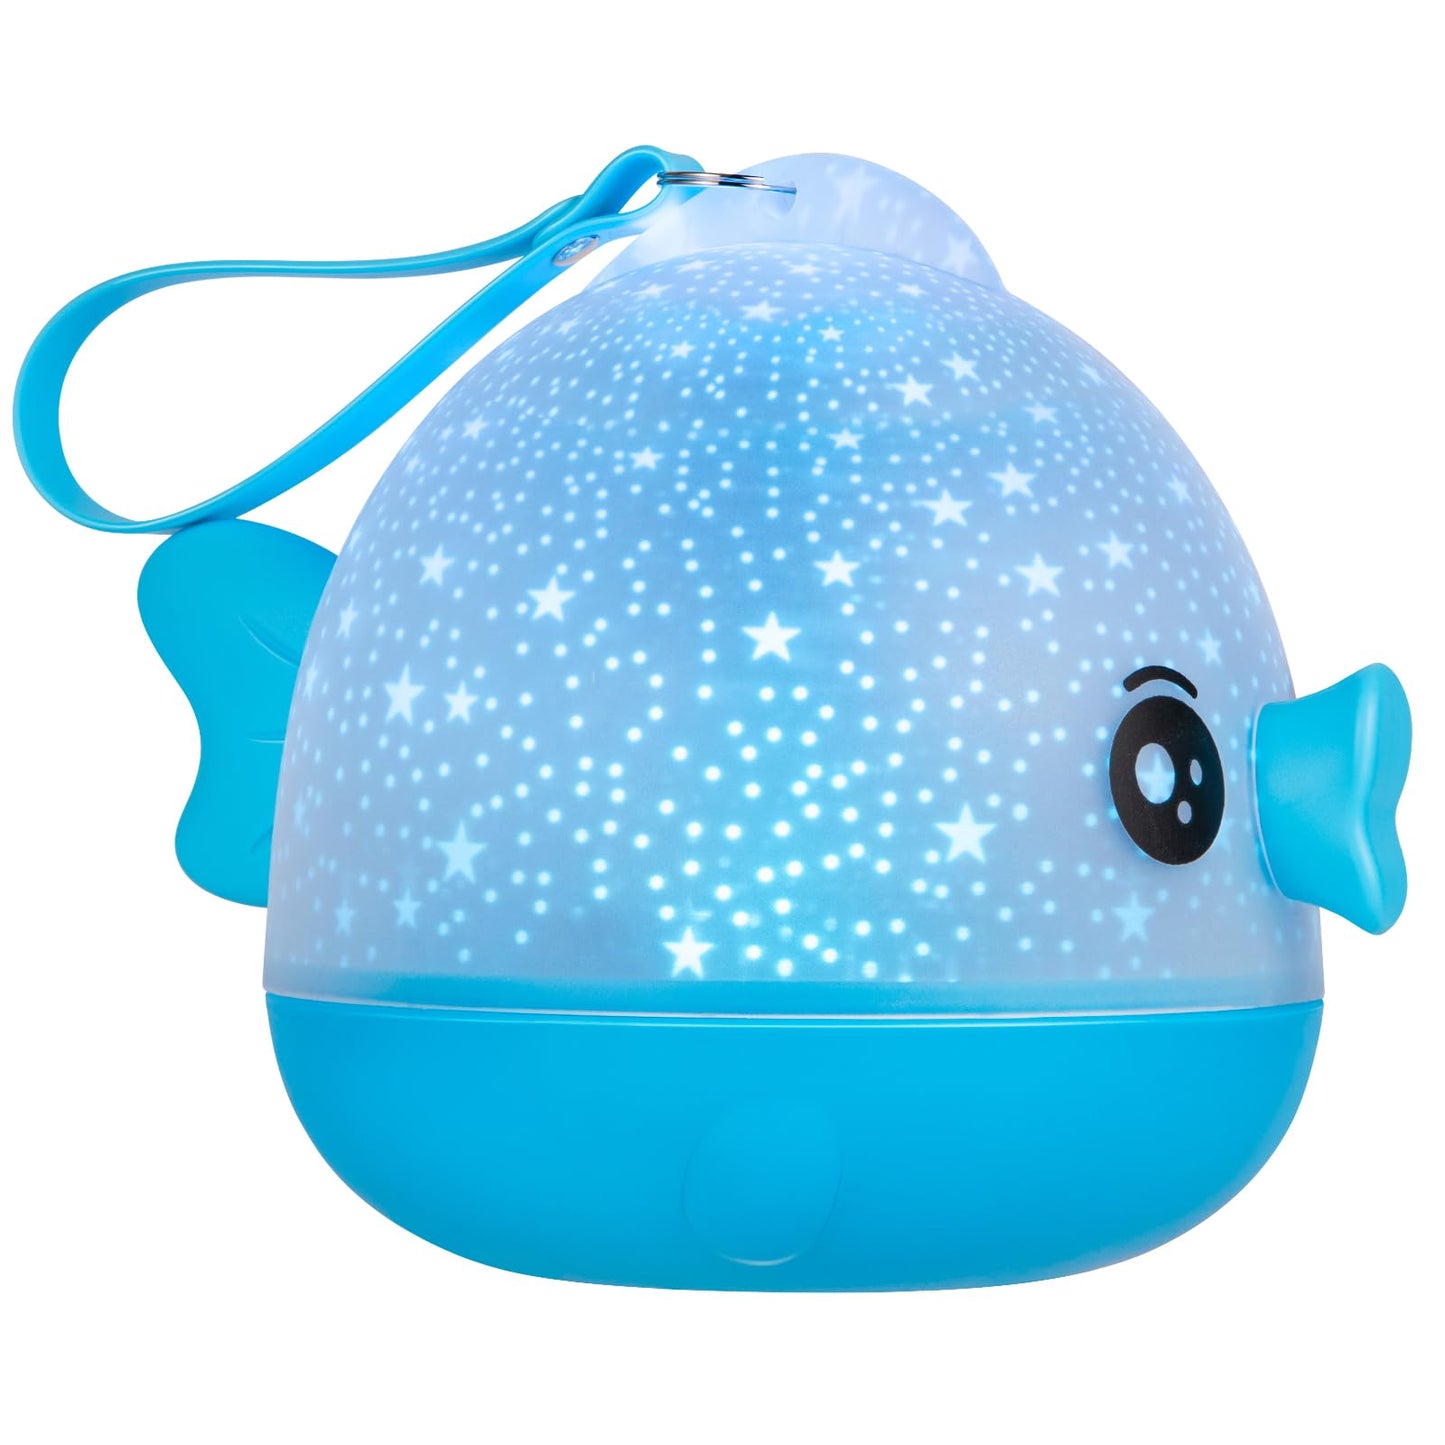 WINICE Remote Control and Timer Design Seabed Starry Sky Rotating LED Star Projector for Bedroom, Night Light for Kids, Night Color Moon Lamp for Children Baby Teens Adults(Blue)